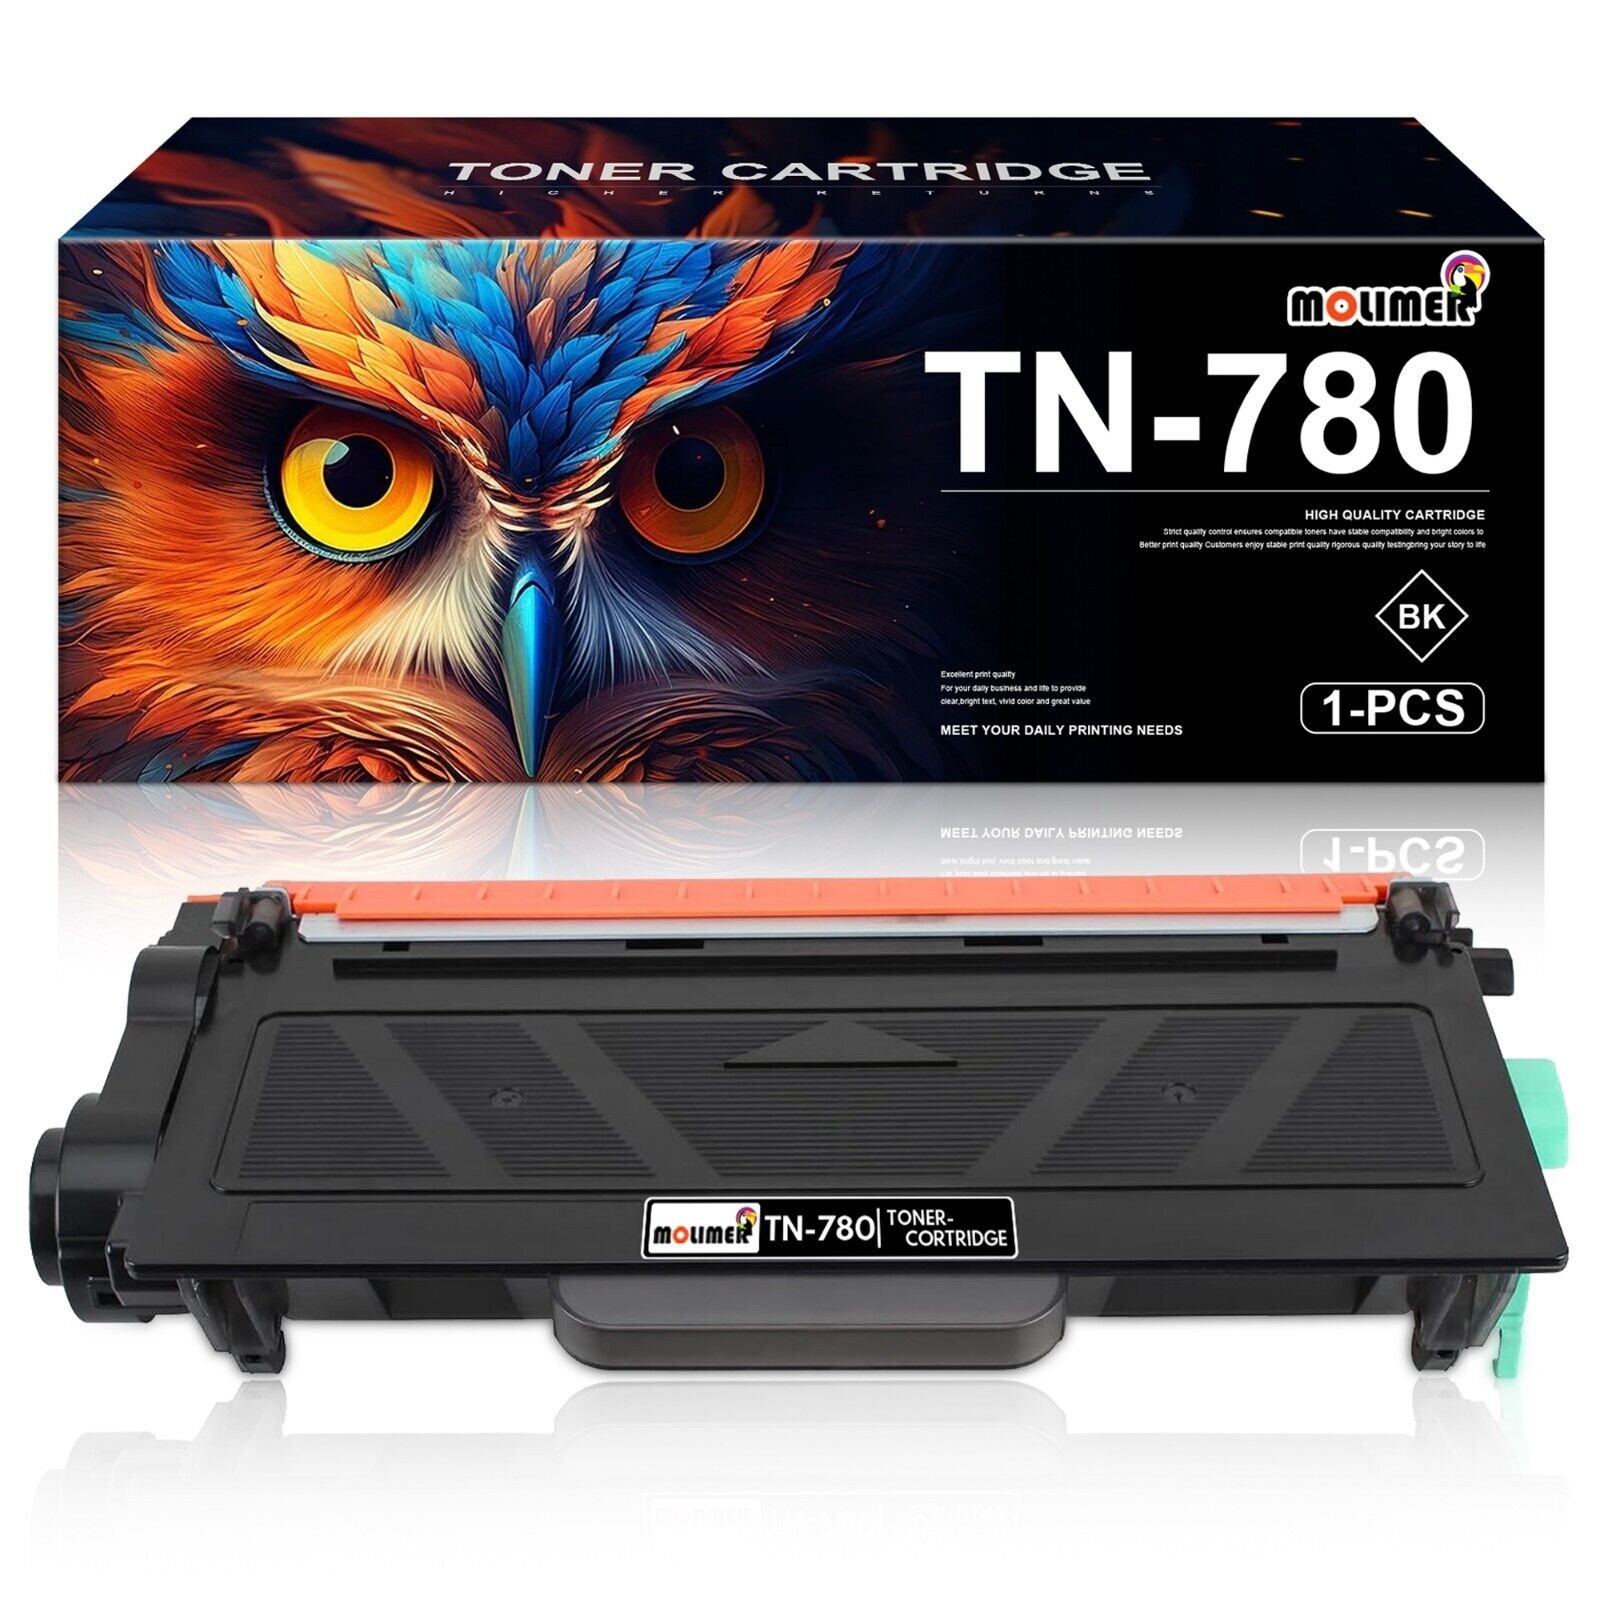 TN780 High Yield Toner Cartridge Replacement for Brother TN780 HI-5440D 5450DN